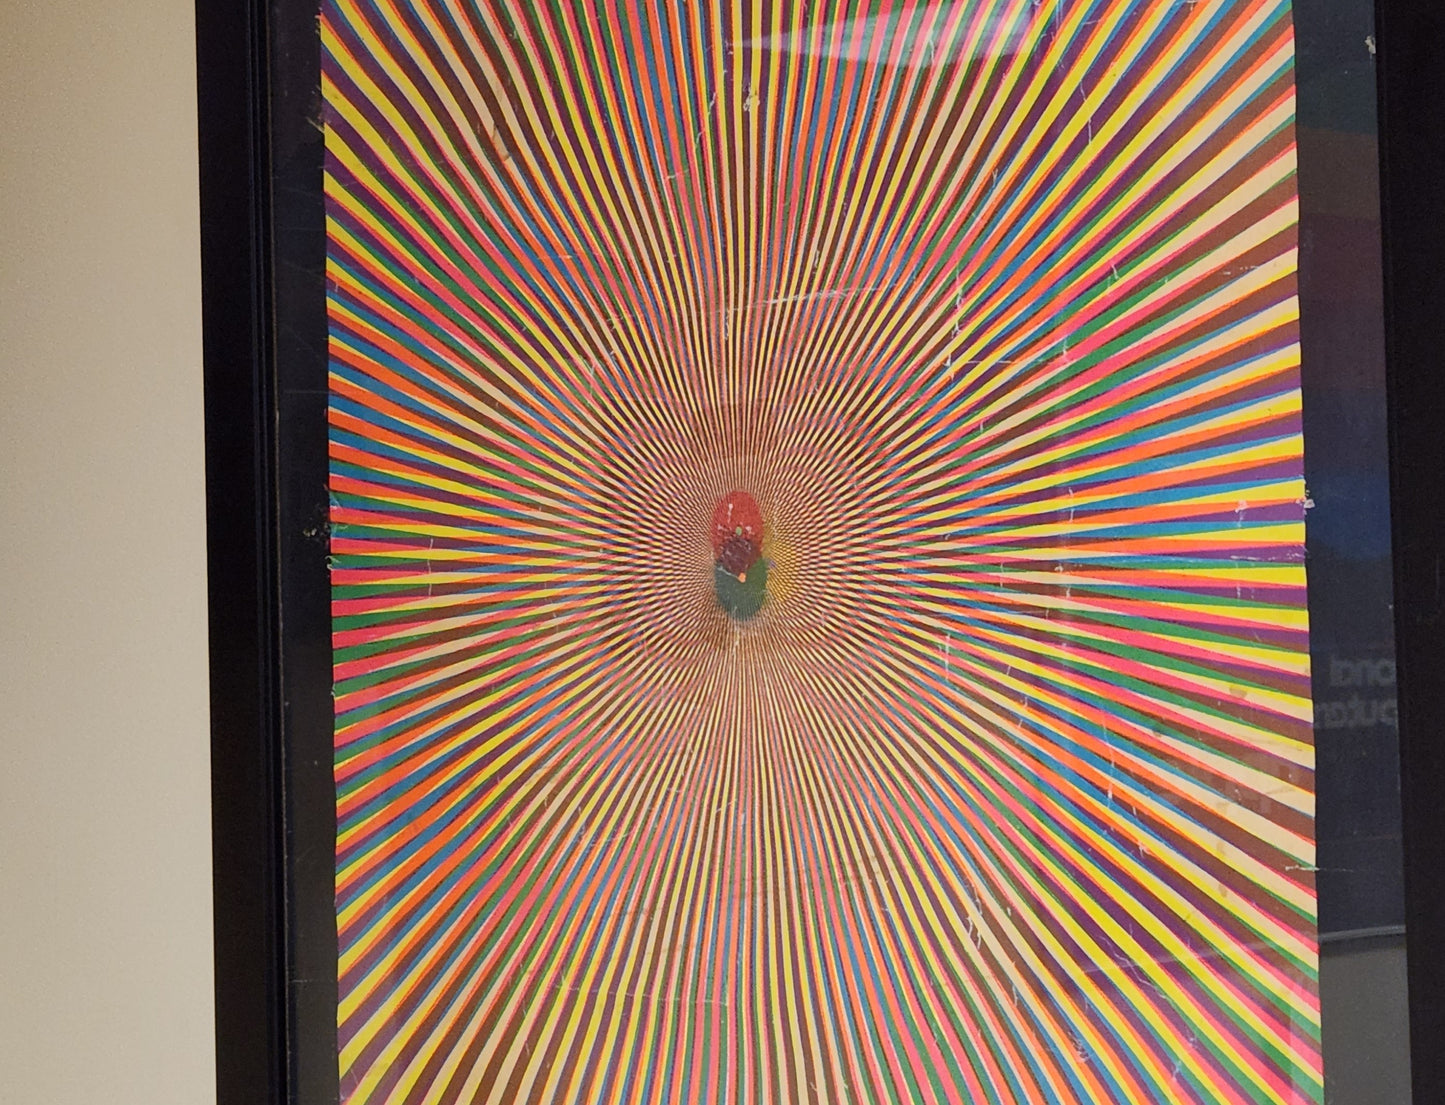 Vintage 1970's Spiral Zonk Psychedelic Illusion Blacklight Poster